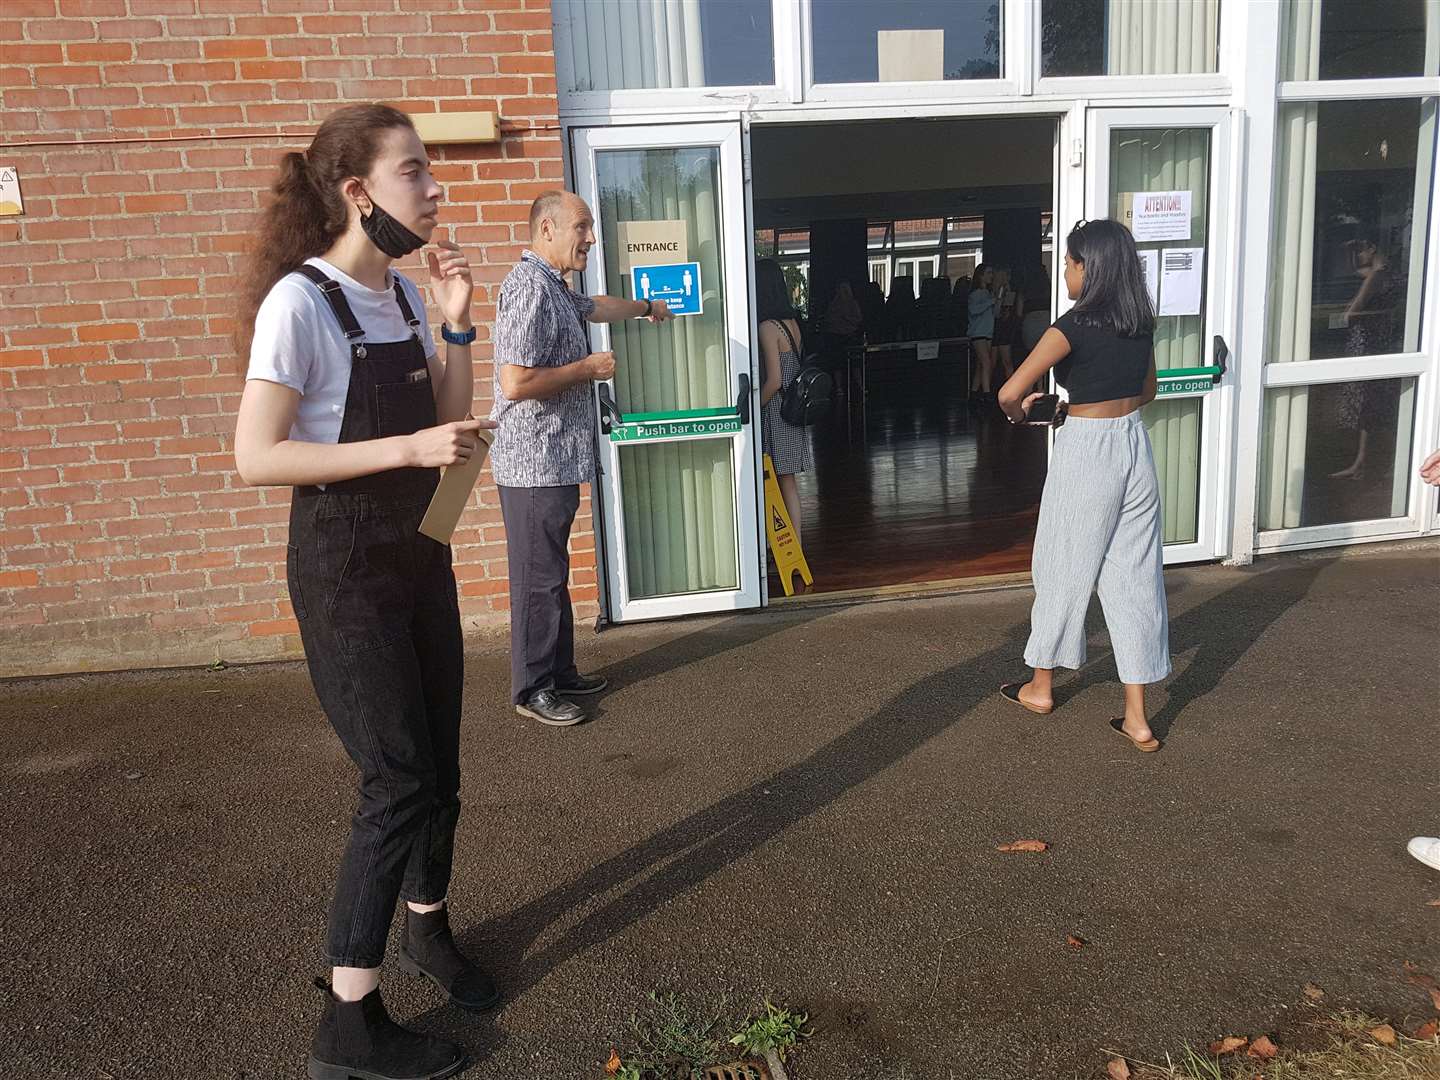 Social distancing systems have been set up in schools across the country, which included a change of venue and staggered entry at Highworth (40415494)